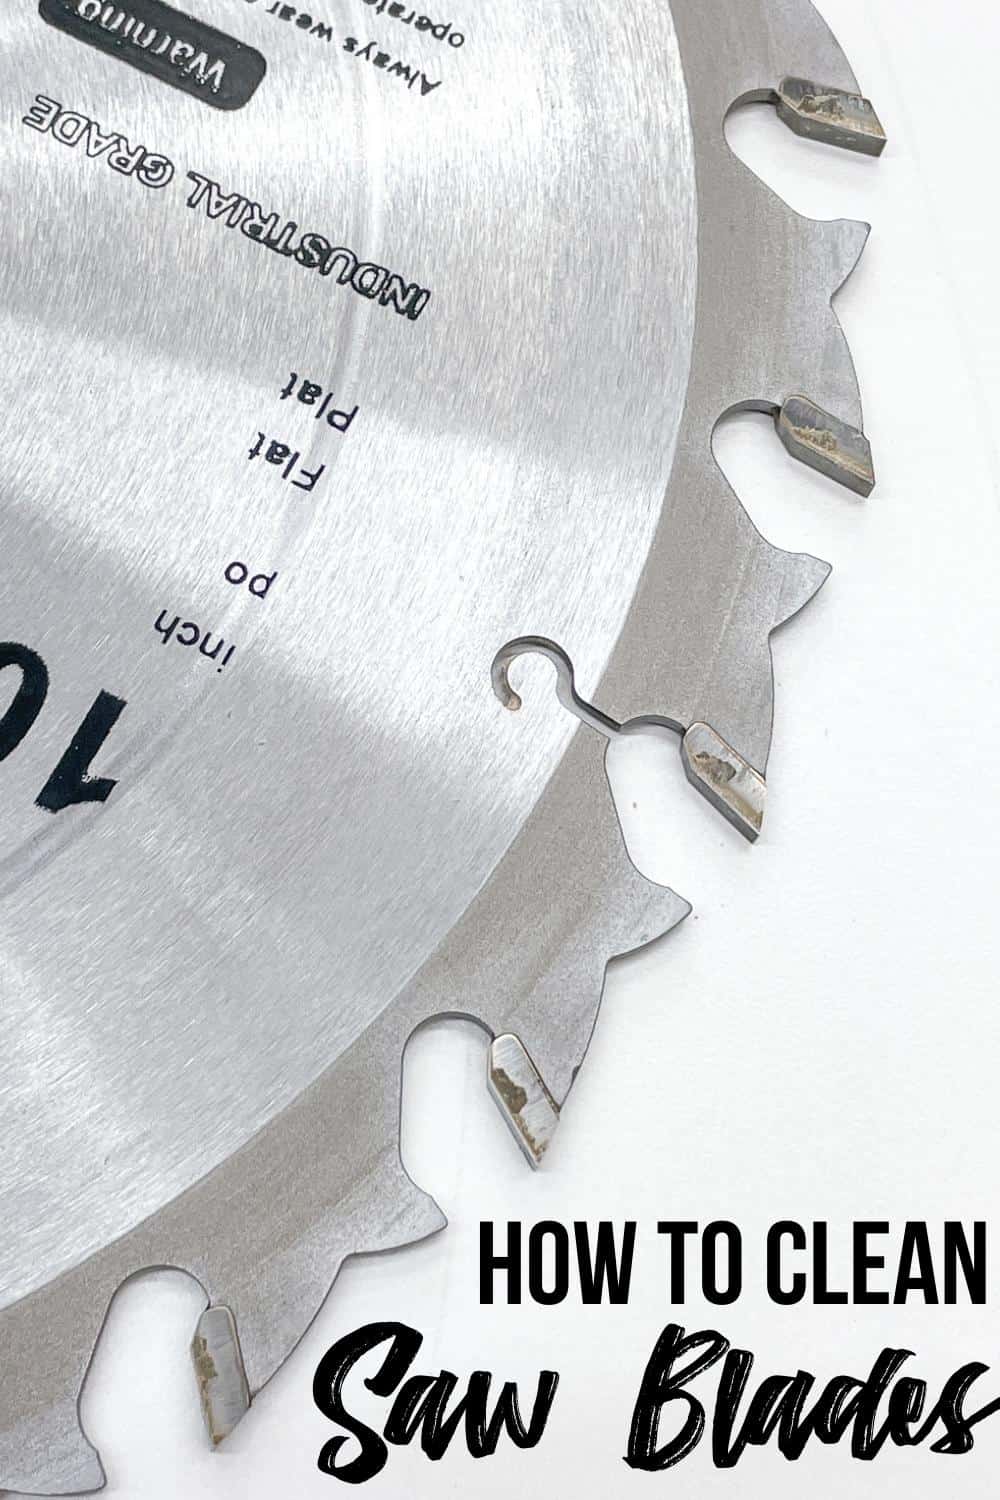 how to clean saw blades